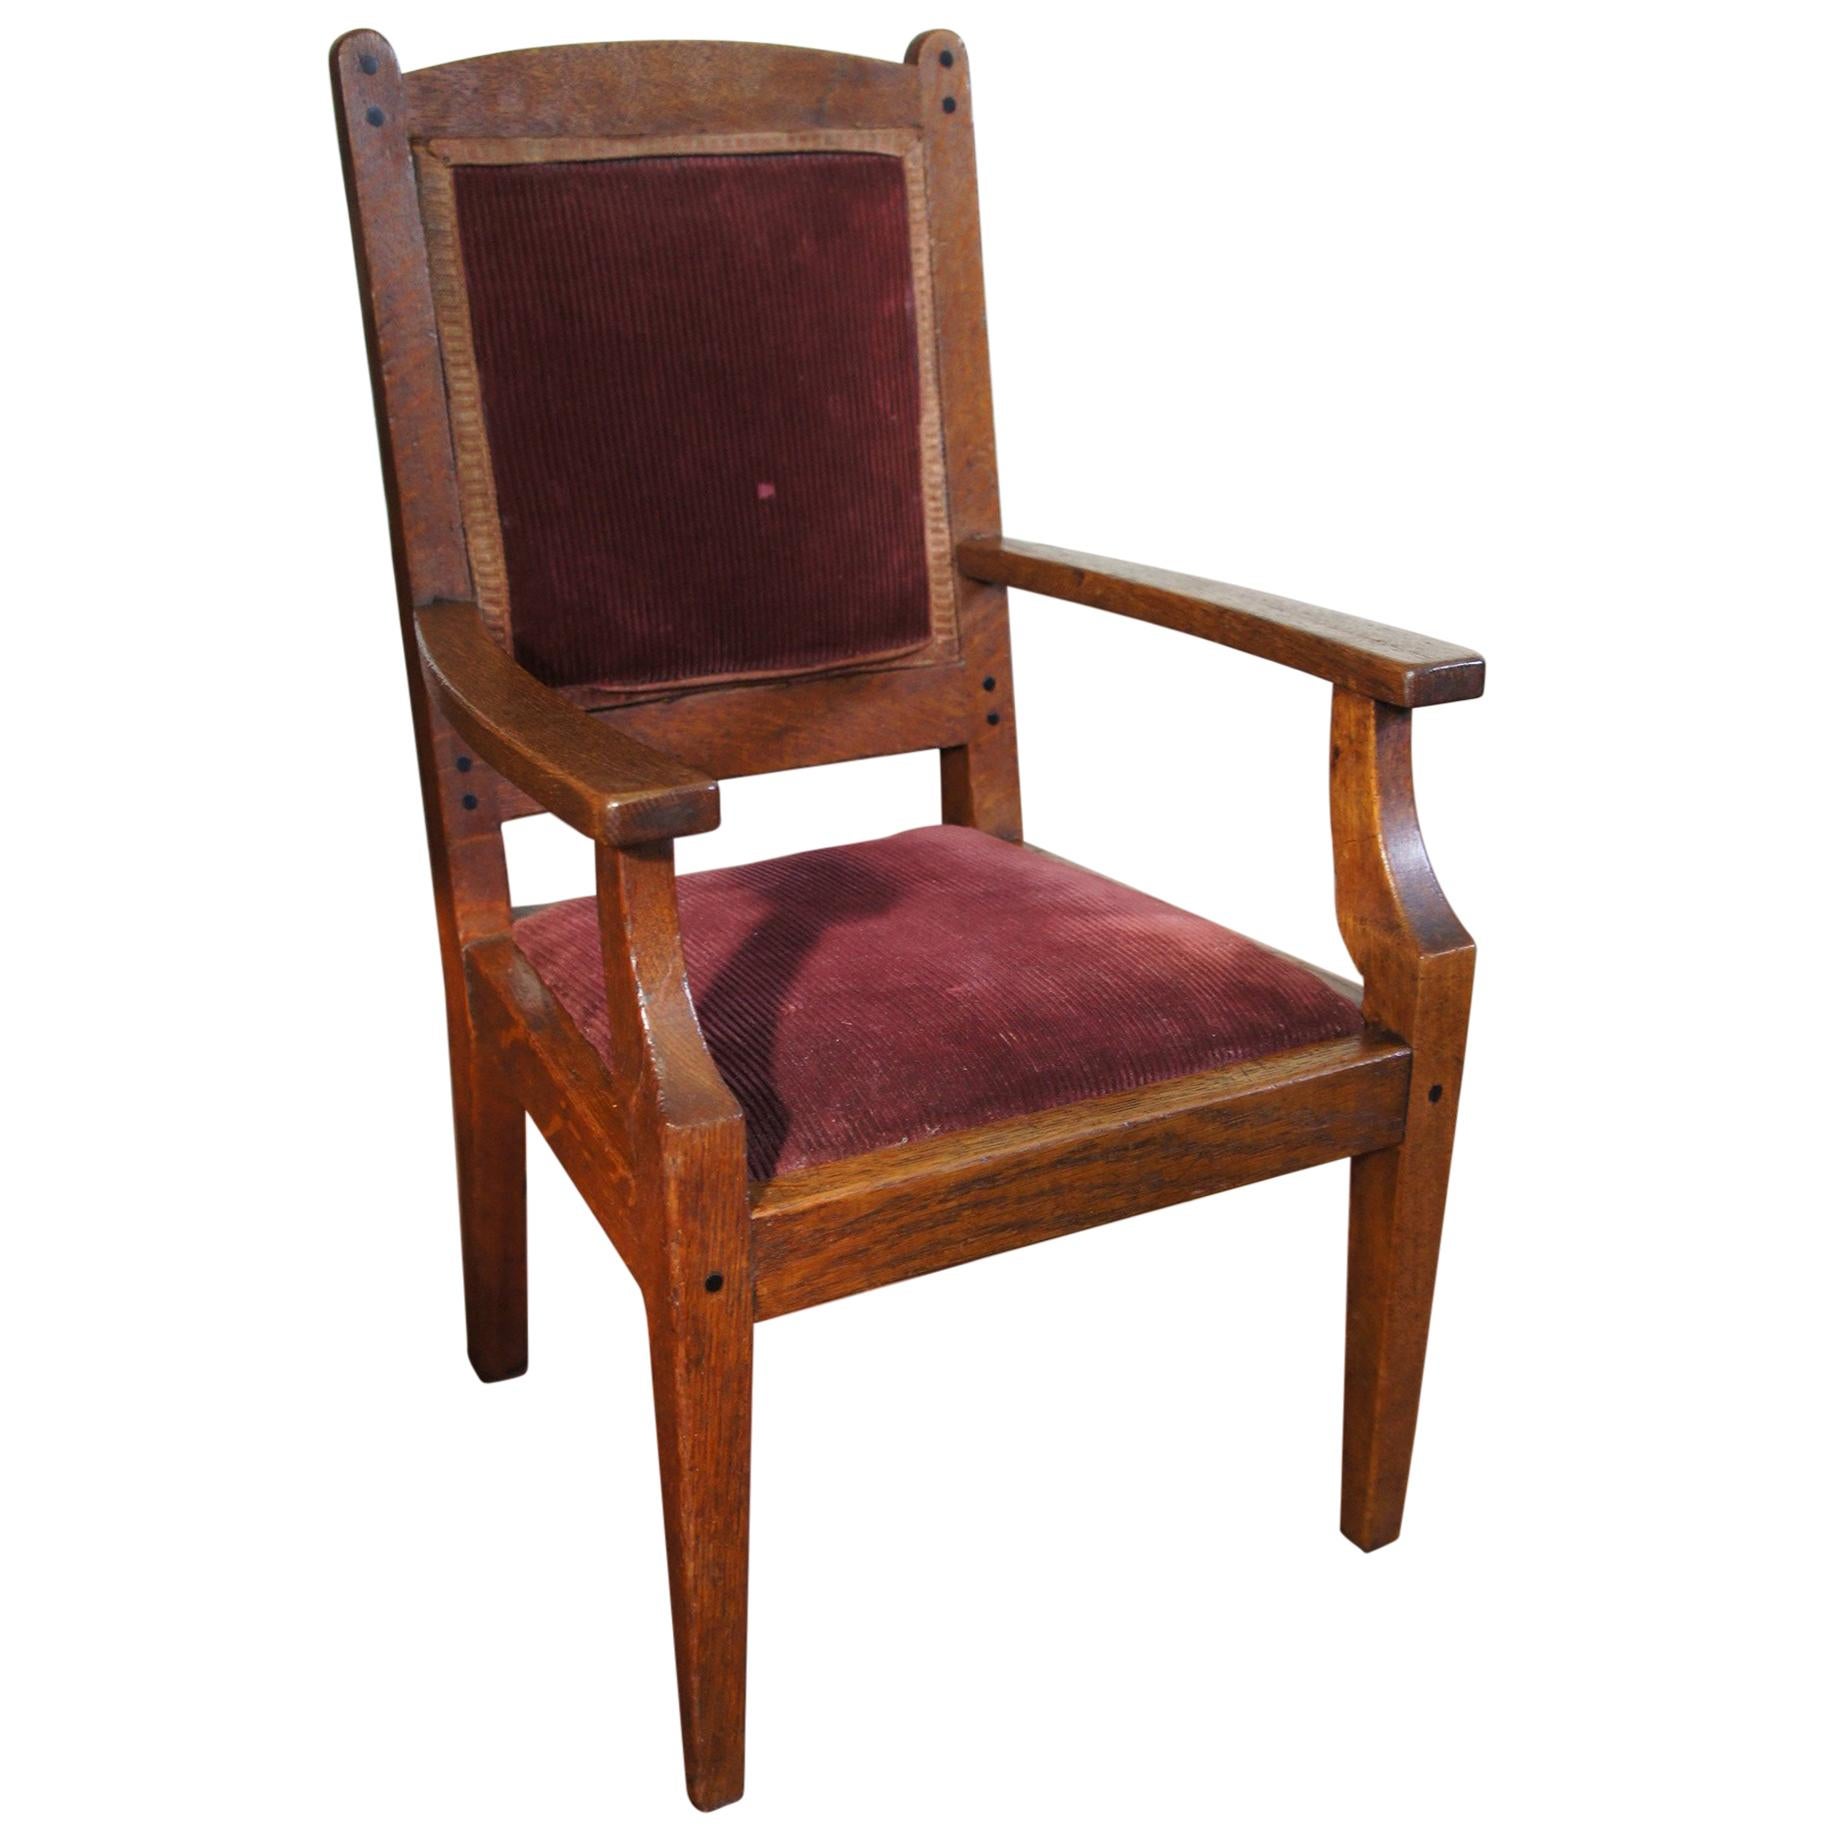 Arts and Crafts Children's or Miniature Chair Attributed to Jac van den Bosch For Sale